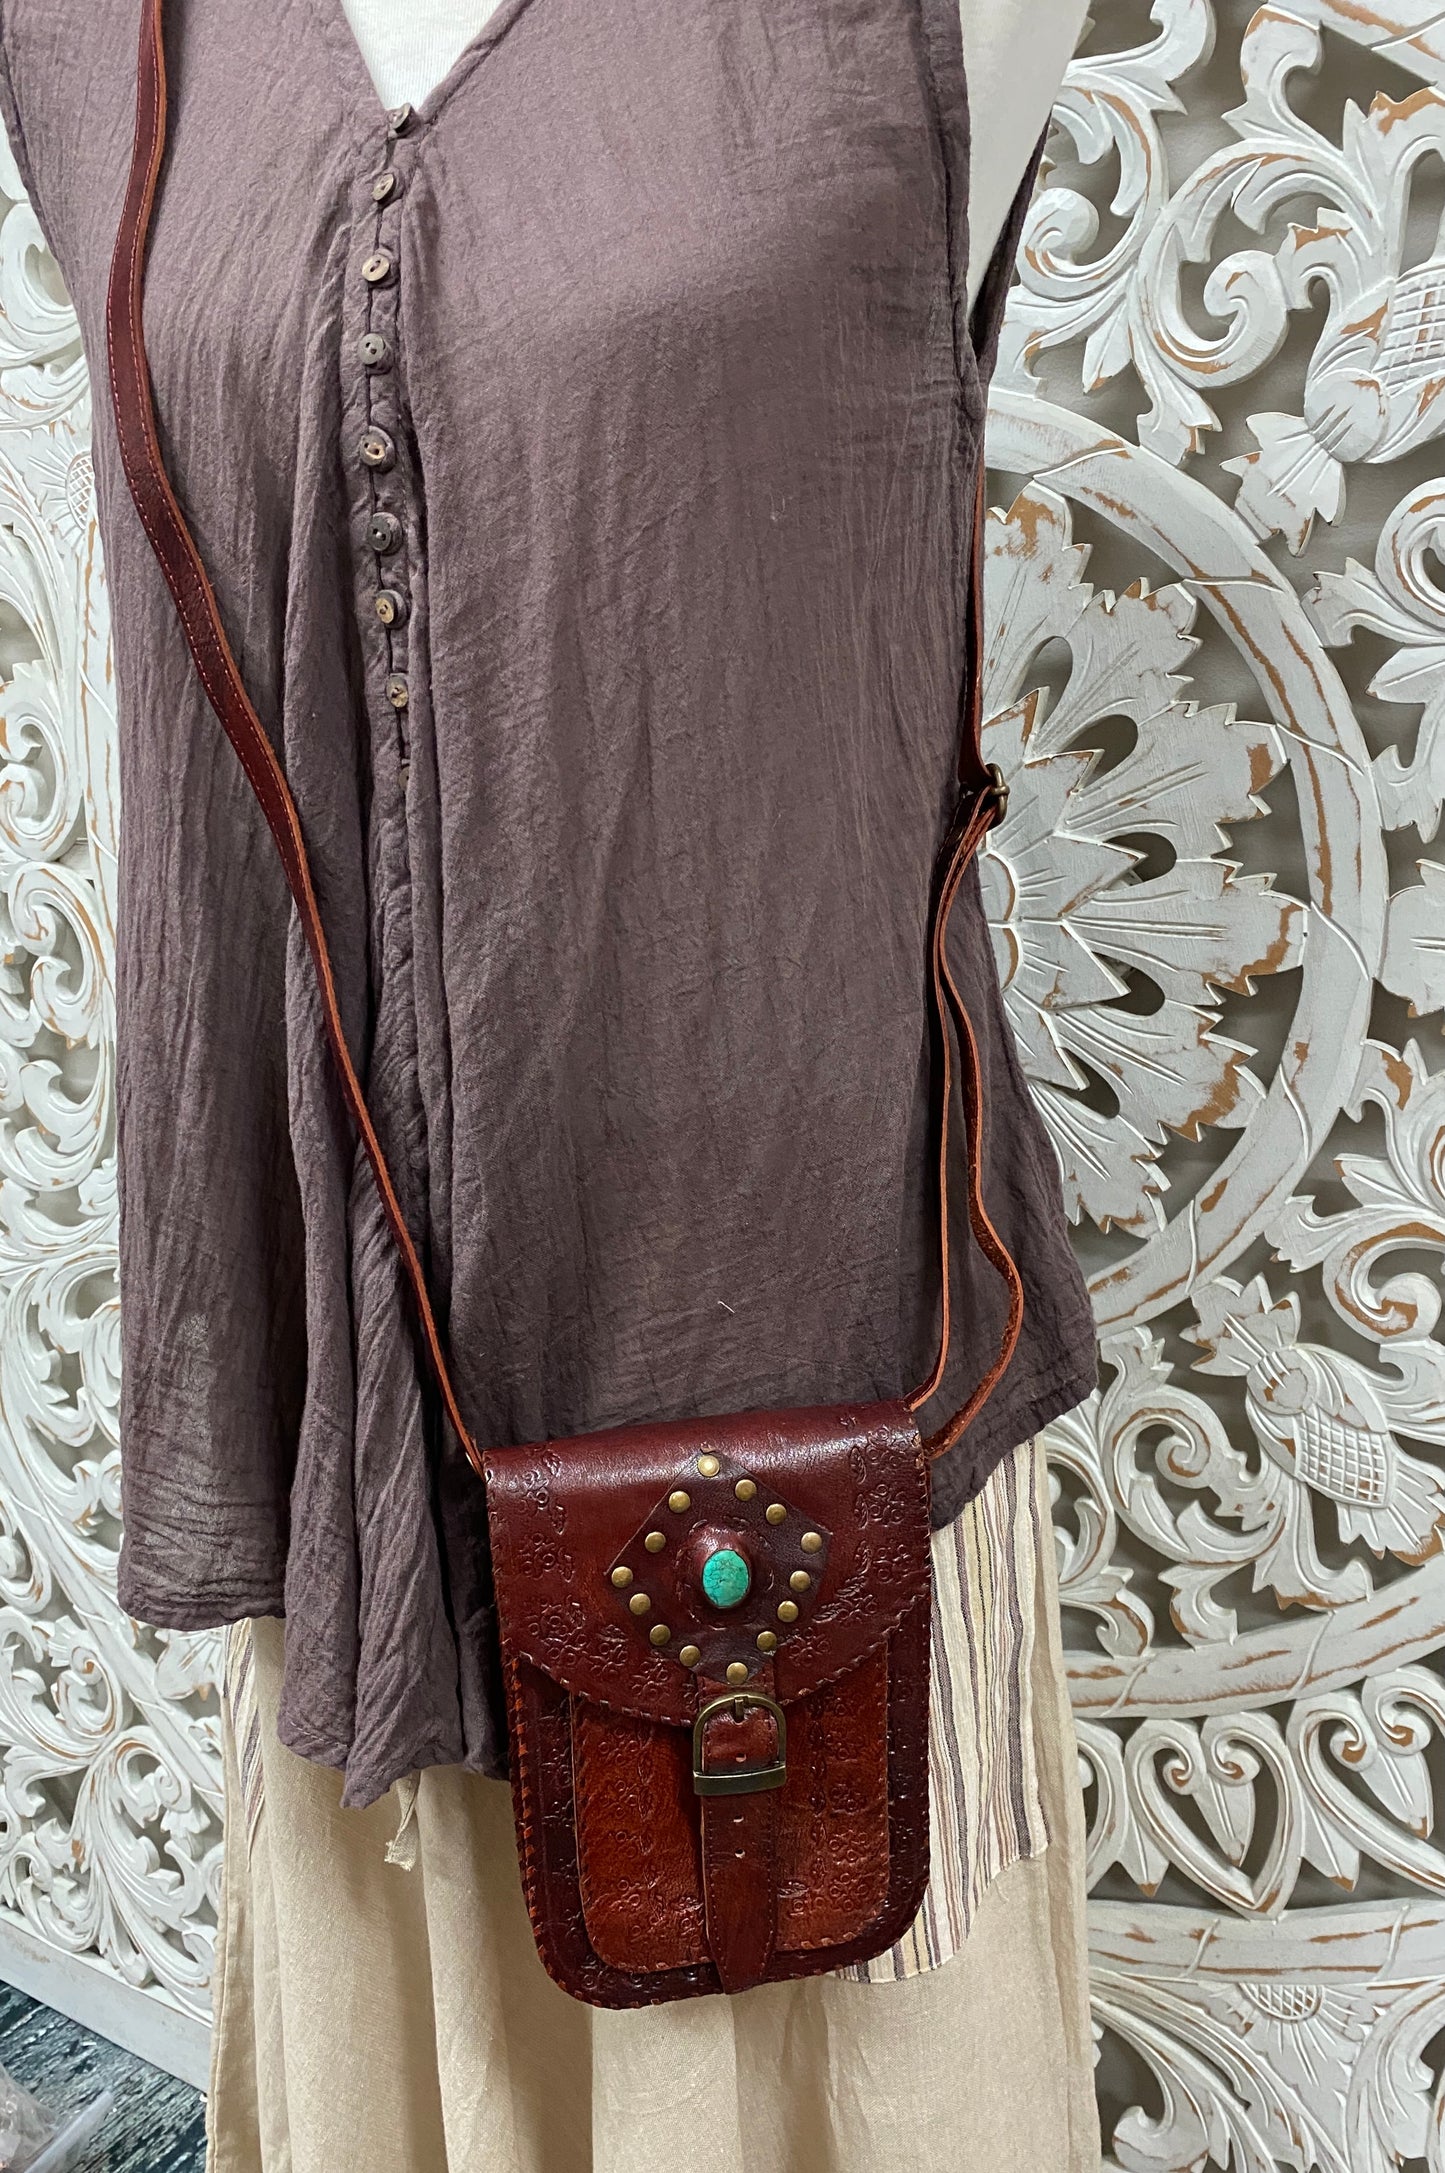 Hand Made Camel Leather purse with Gemstones 3 Pockets! 8" x 6”